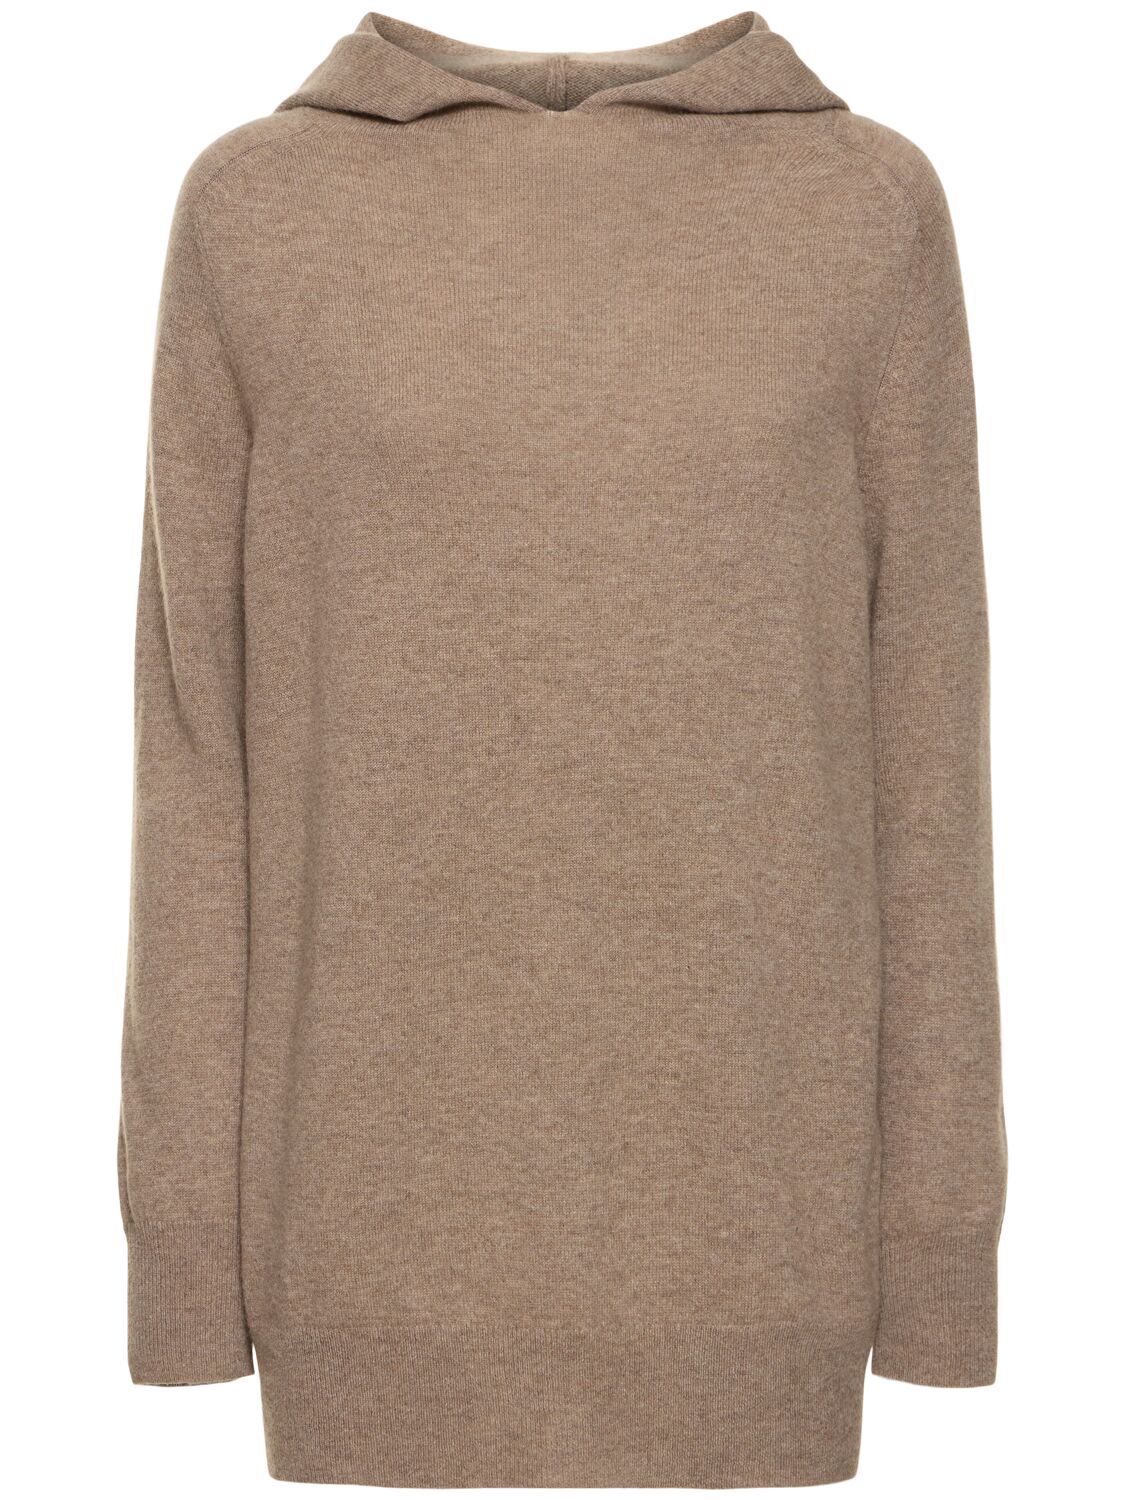 Aspesi Cashmere Knit Hooded Sweater In Brown